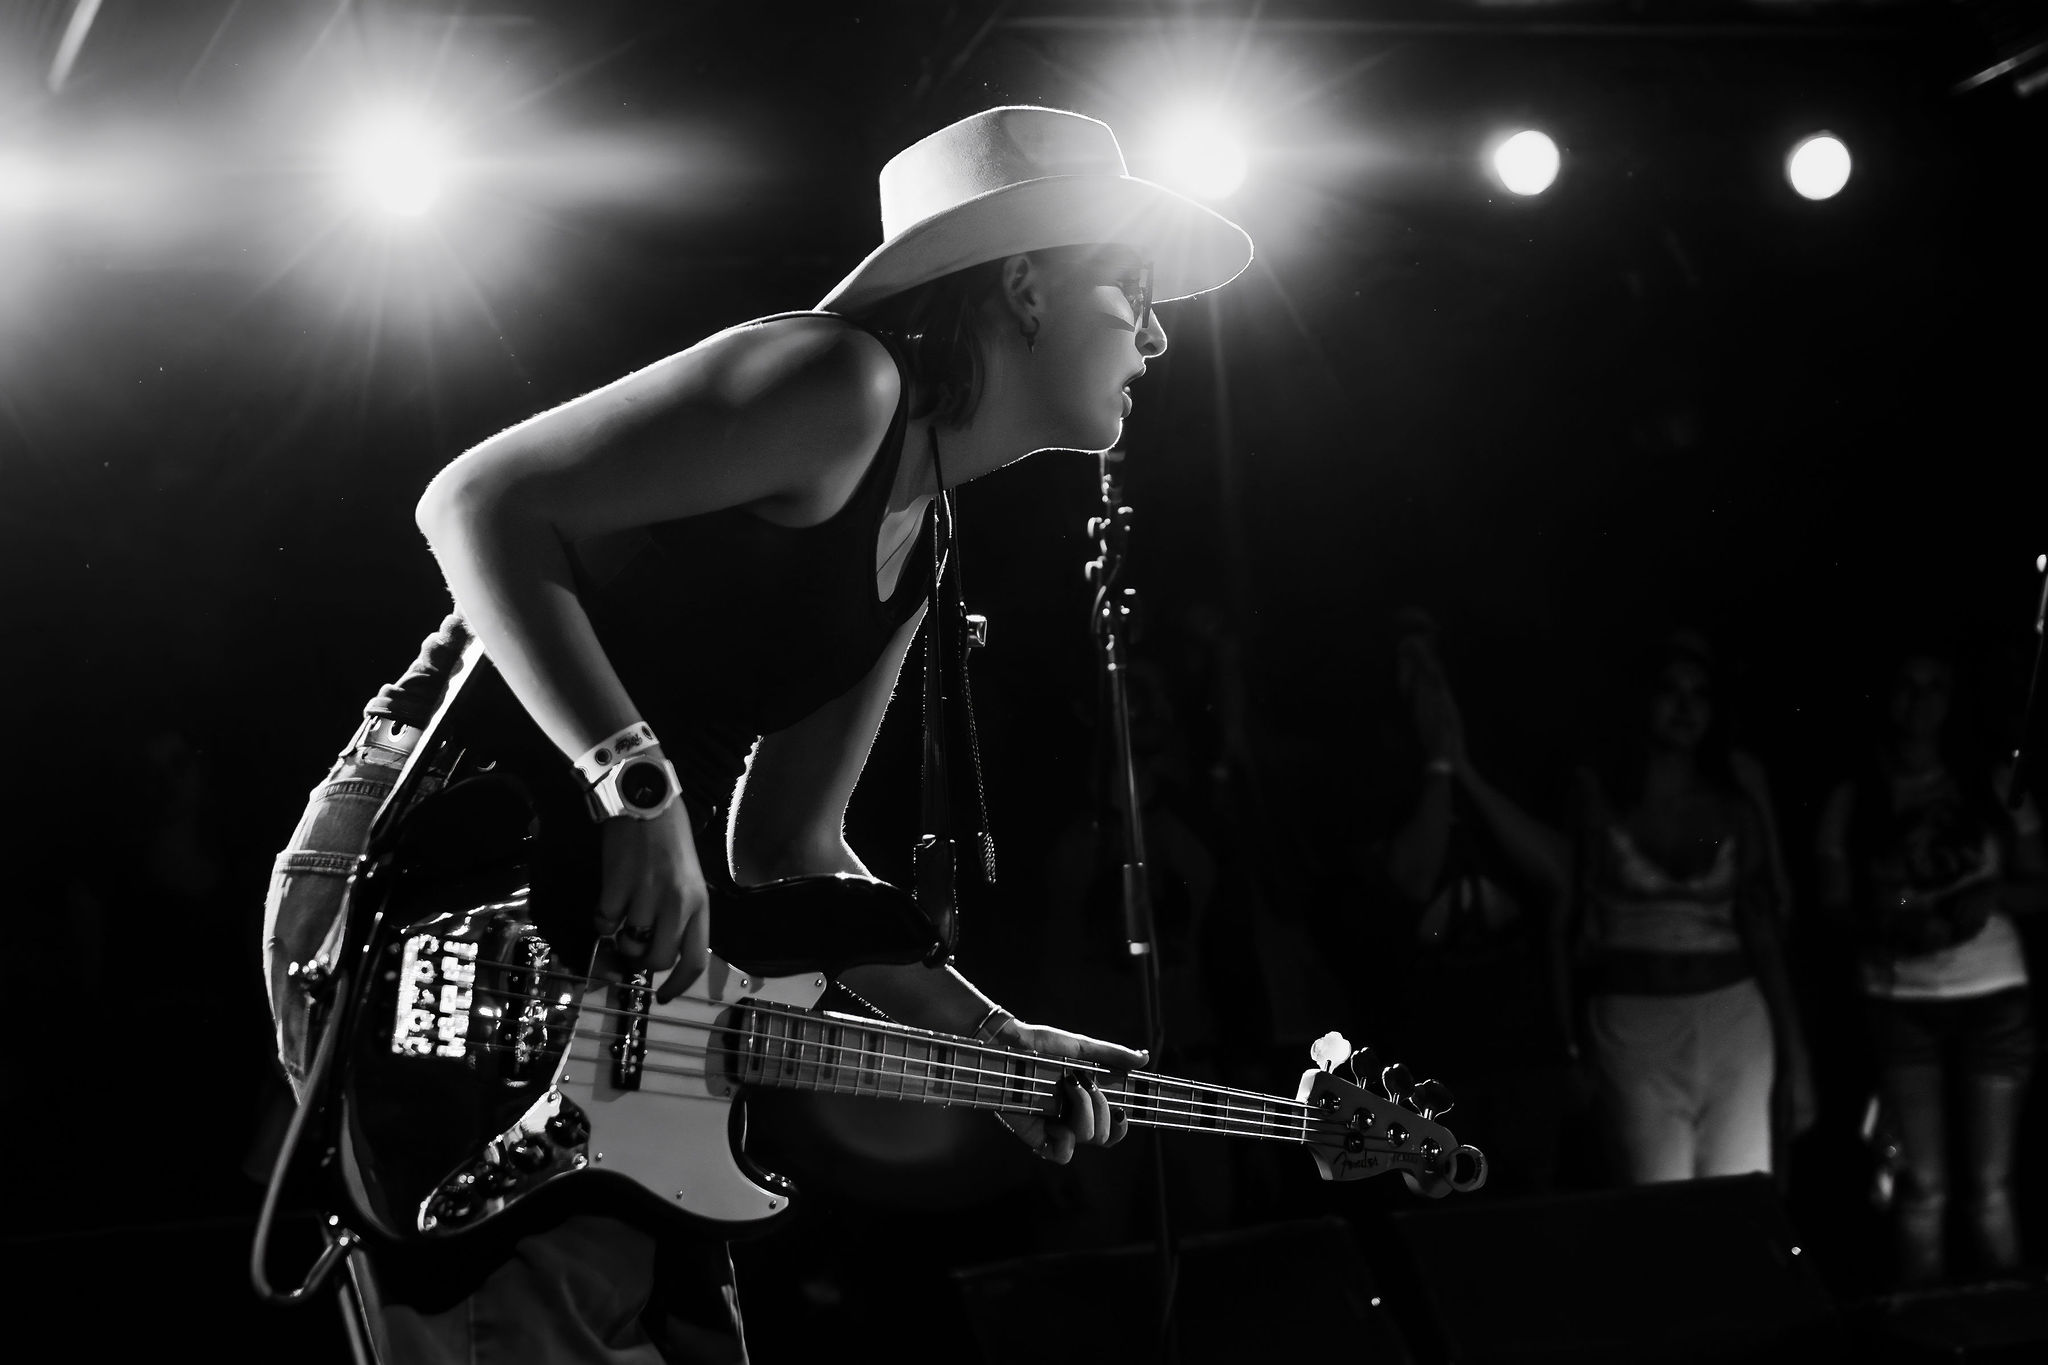 A bassist with a hat on playing while leaning into the crowd